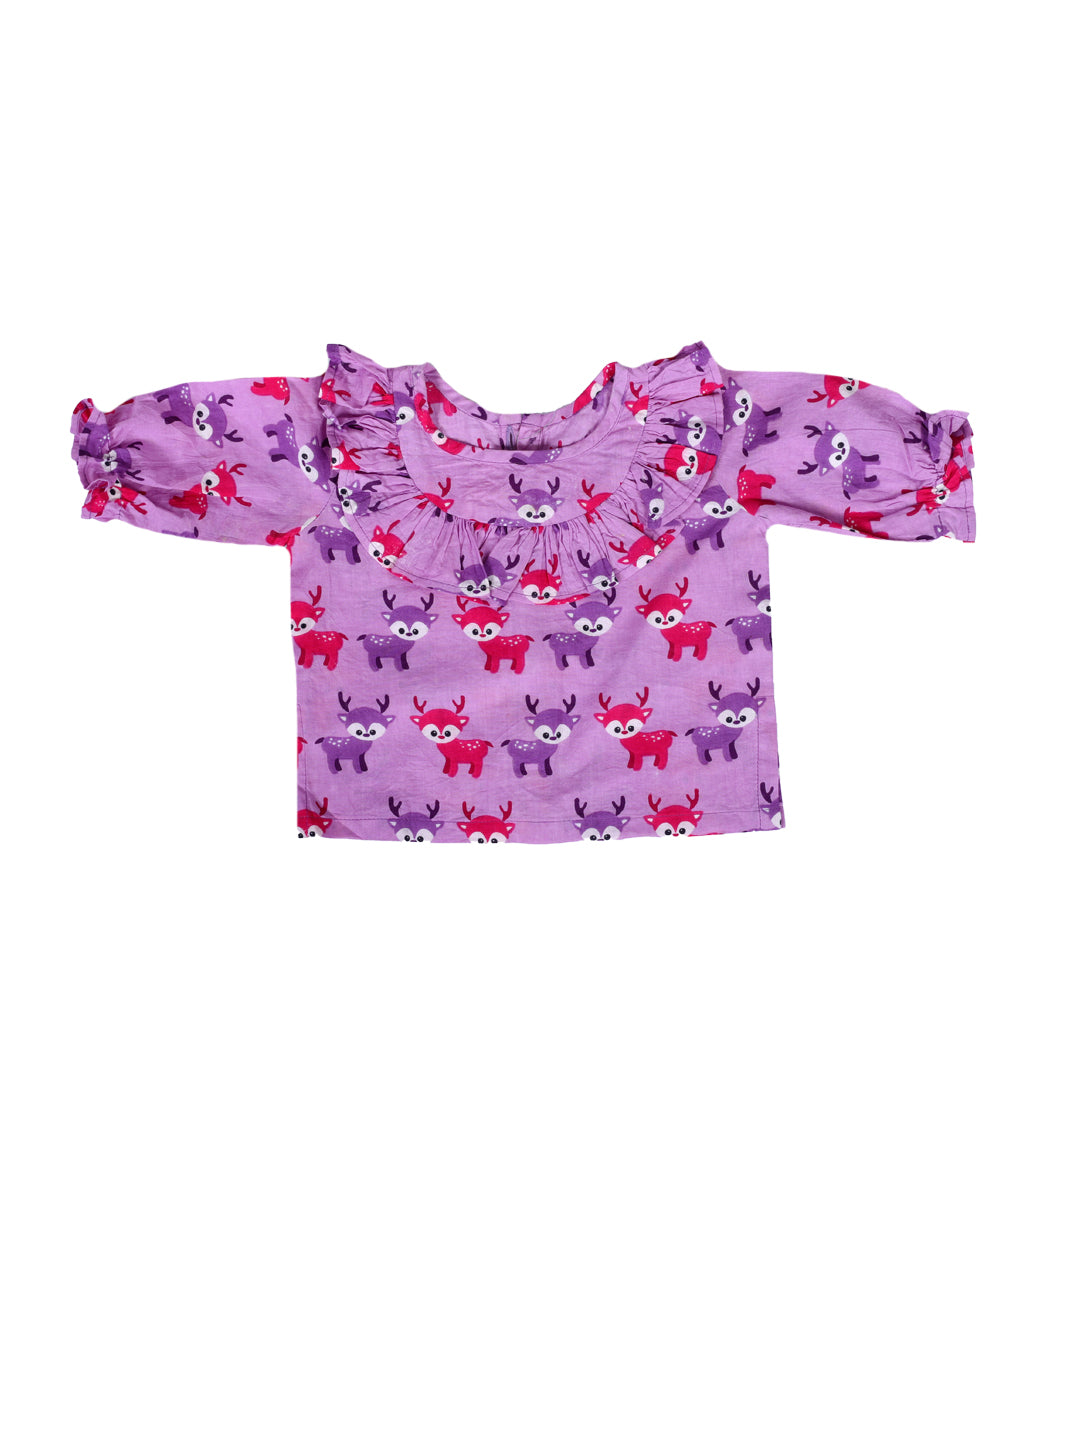 BownBee  Baby Girls Pure Cotton Top Harem with Headband and Booties  Purple